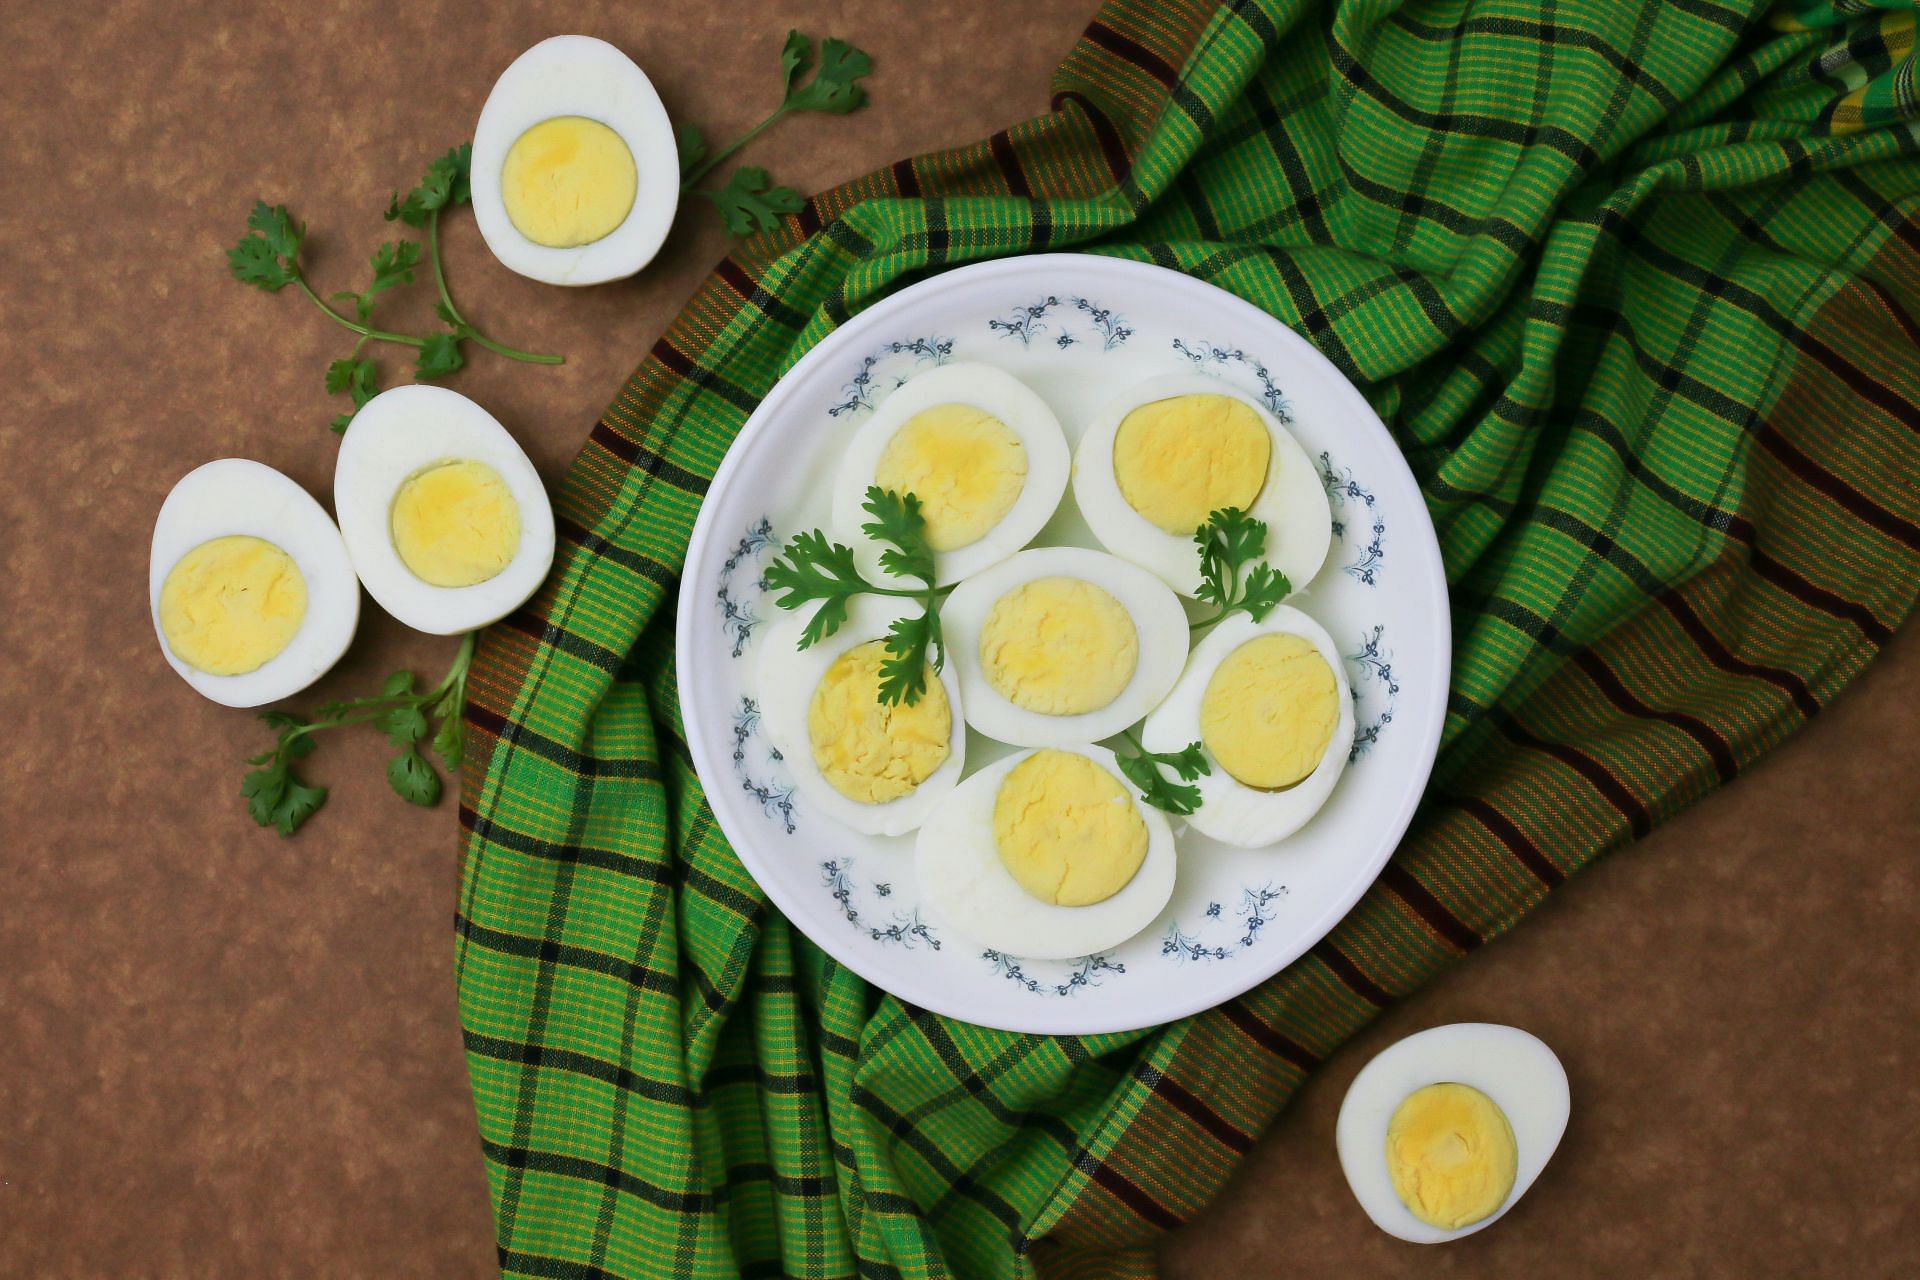 Eggs are the cheapest source of protein that last long. (Image via Unsplash/Tamanna Rumee)